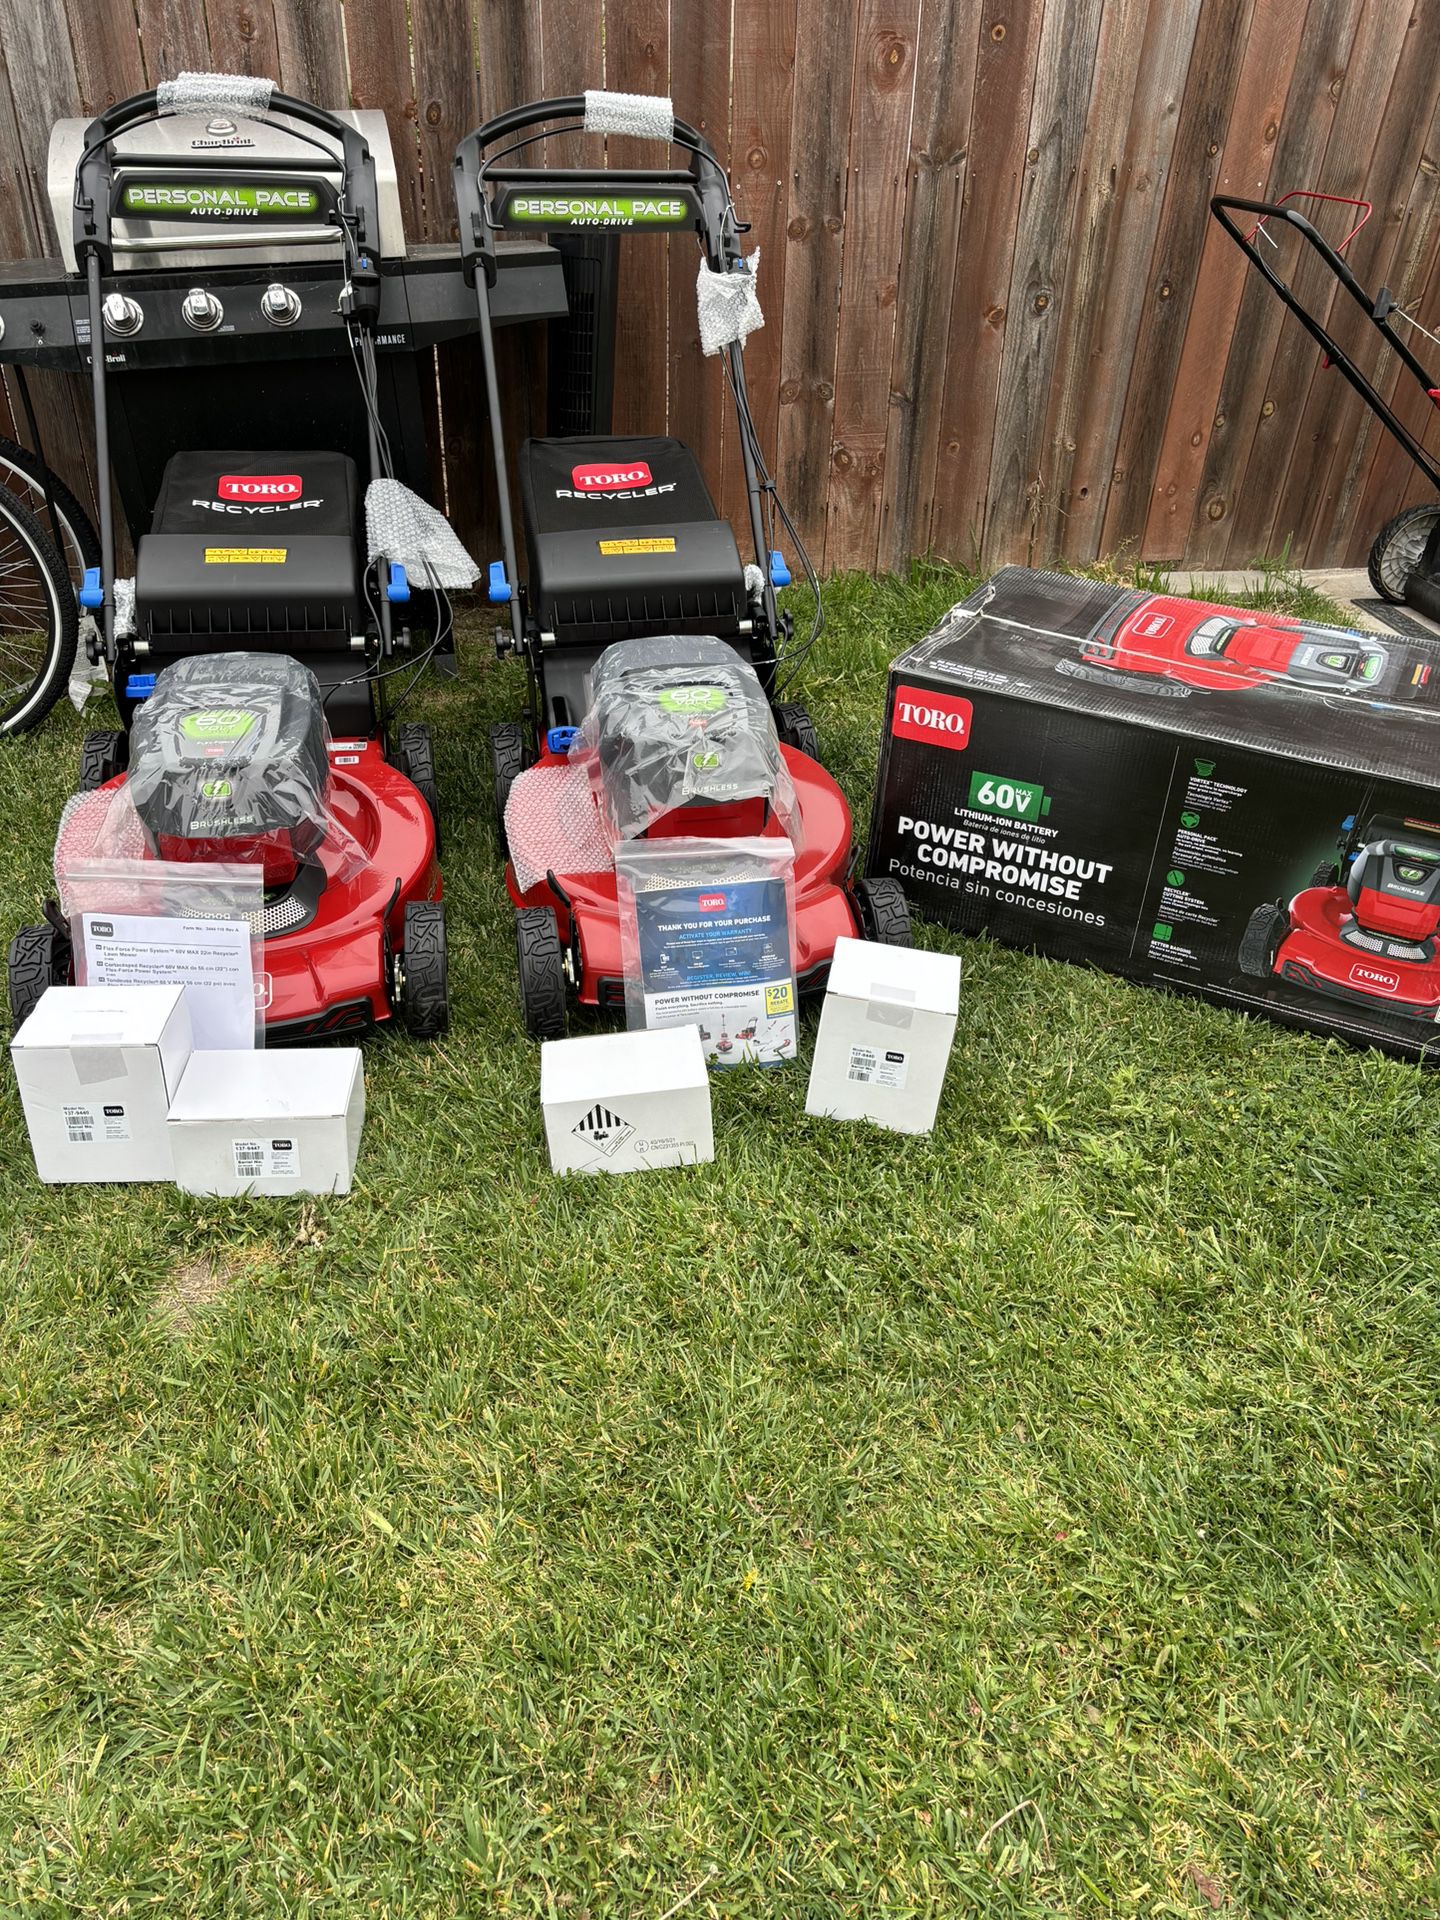 Toro Recycler 22 in. 60 V Battery Self-Propelled Lawn Mower Kit (Battery & Charger)